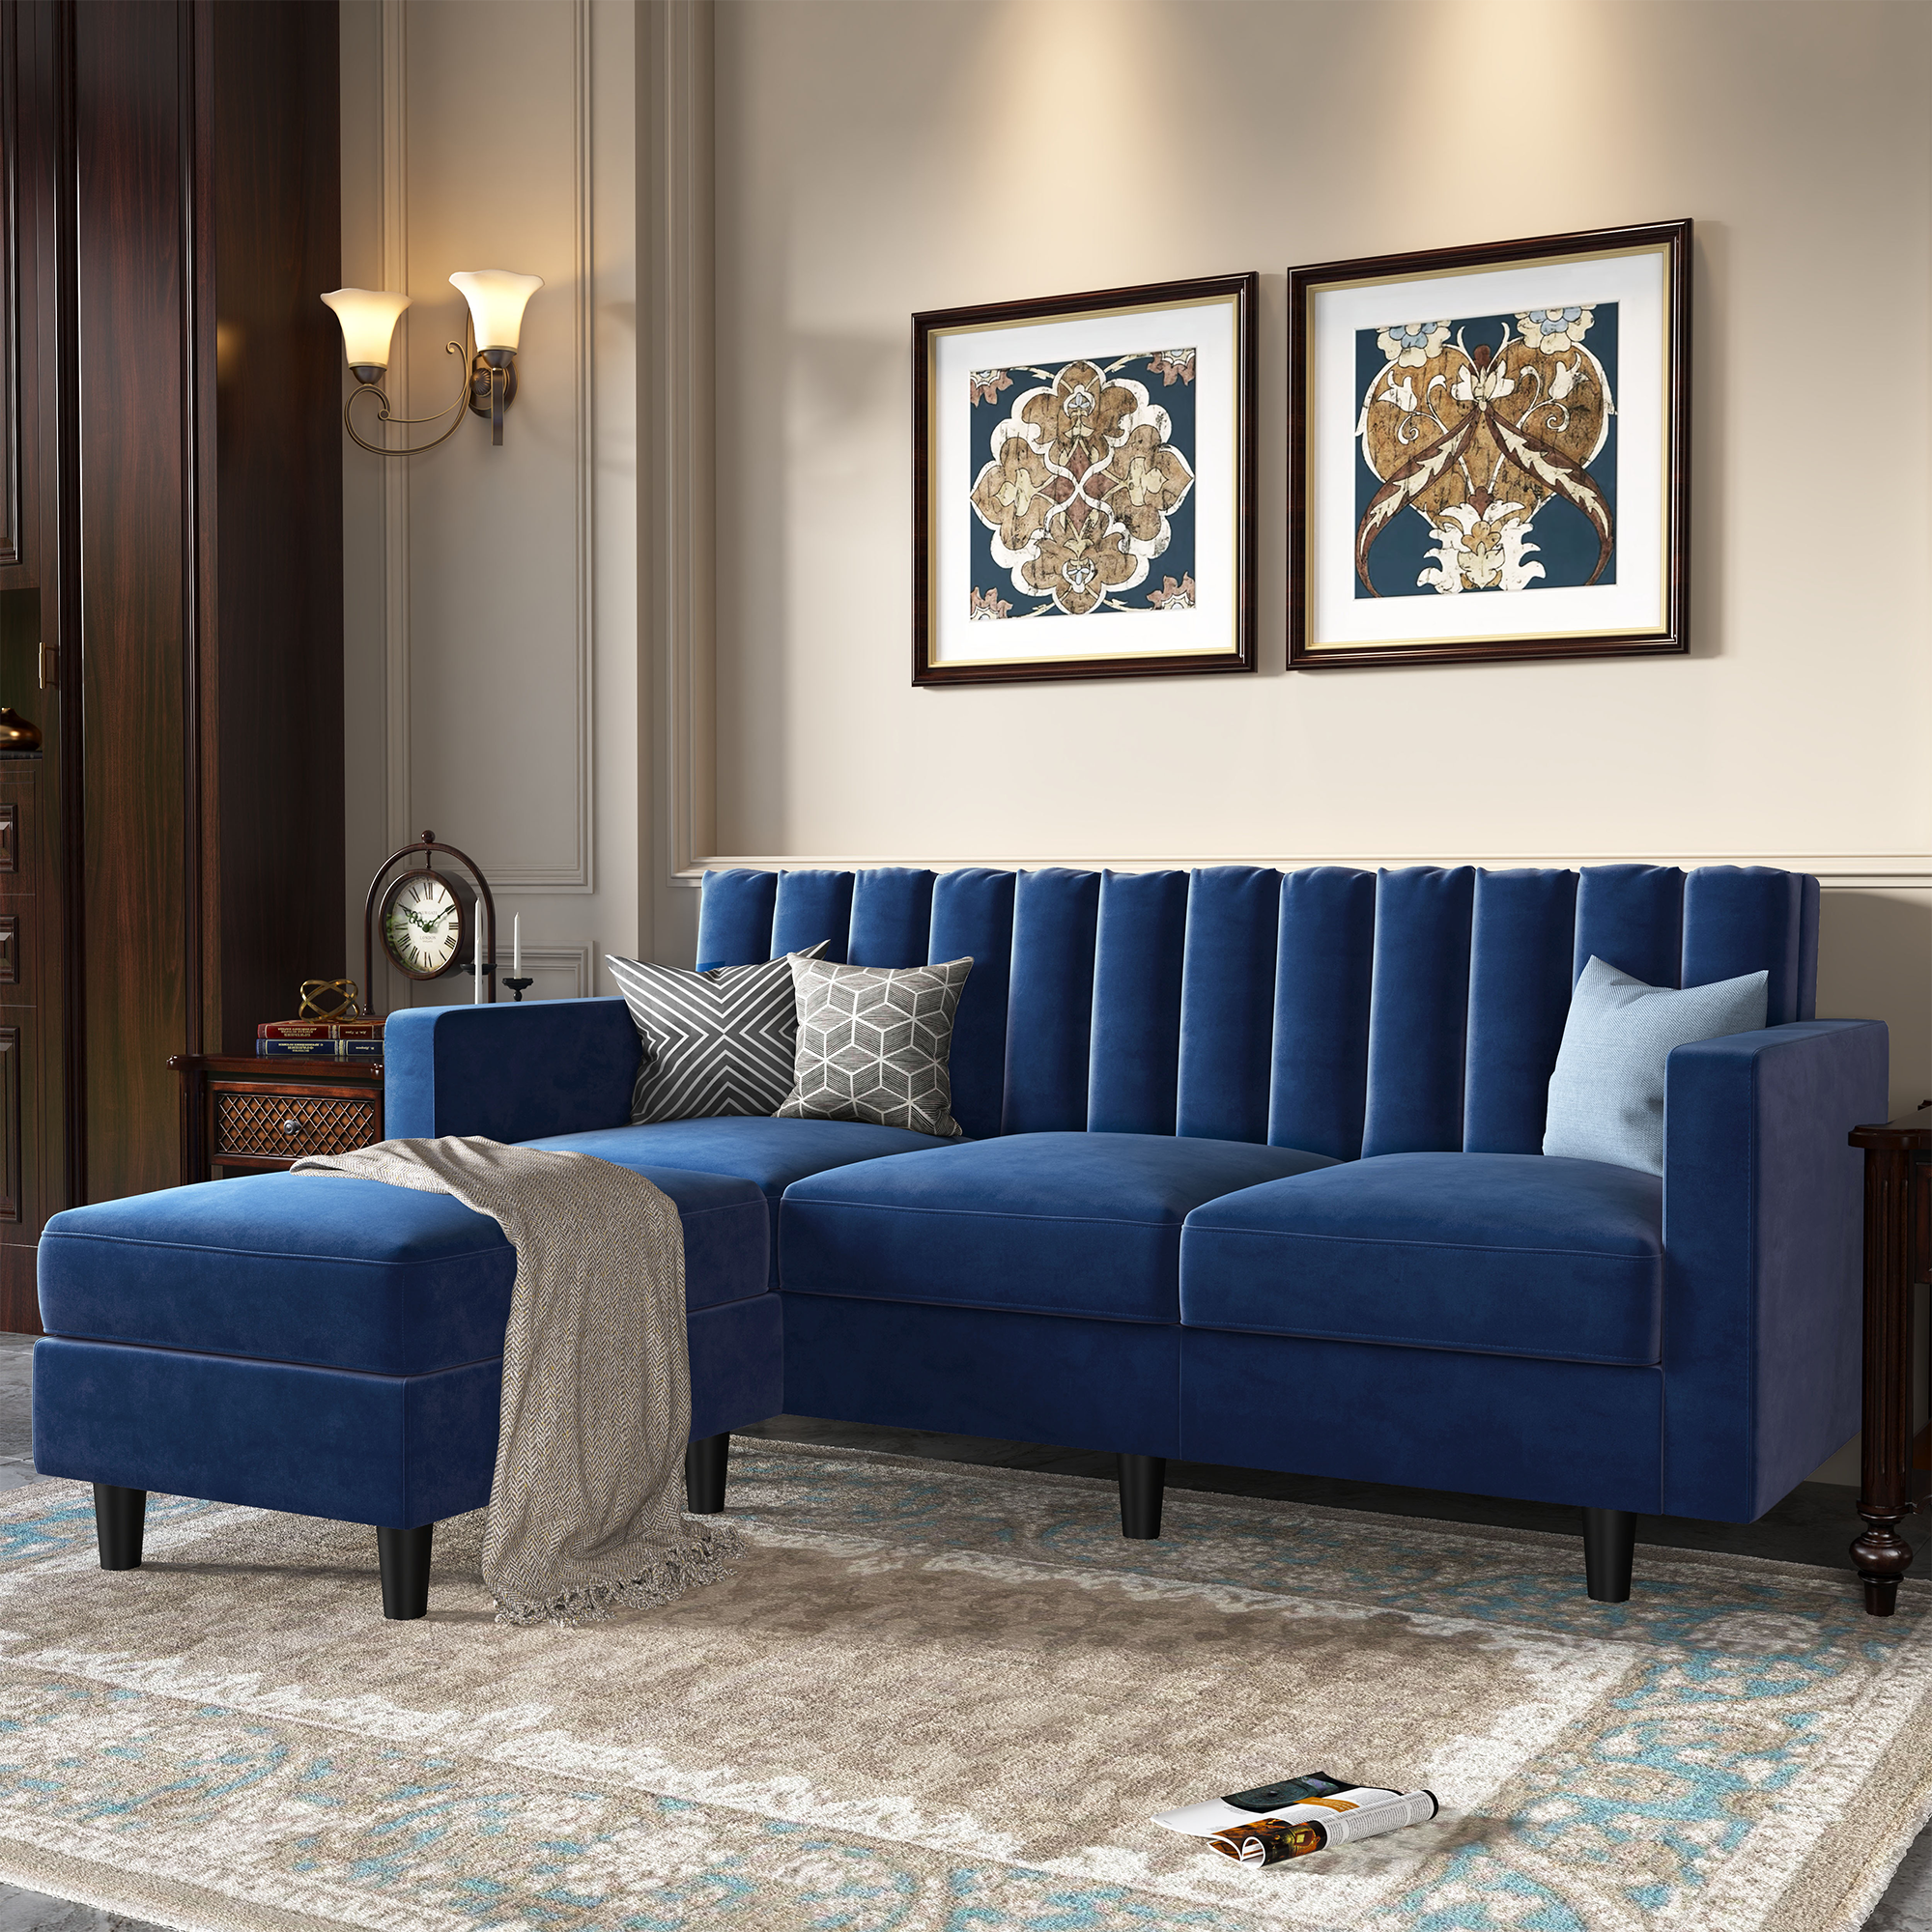 HONBAY Dark Blue Velvet Channeled Sectional Sofa Couch with Convertible Chaise